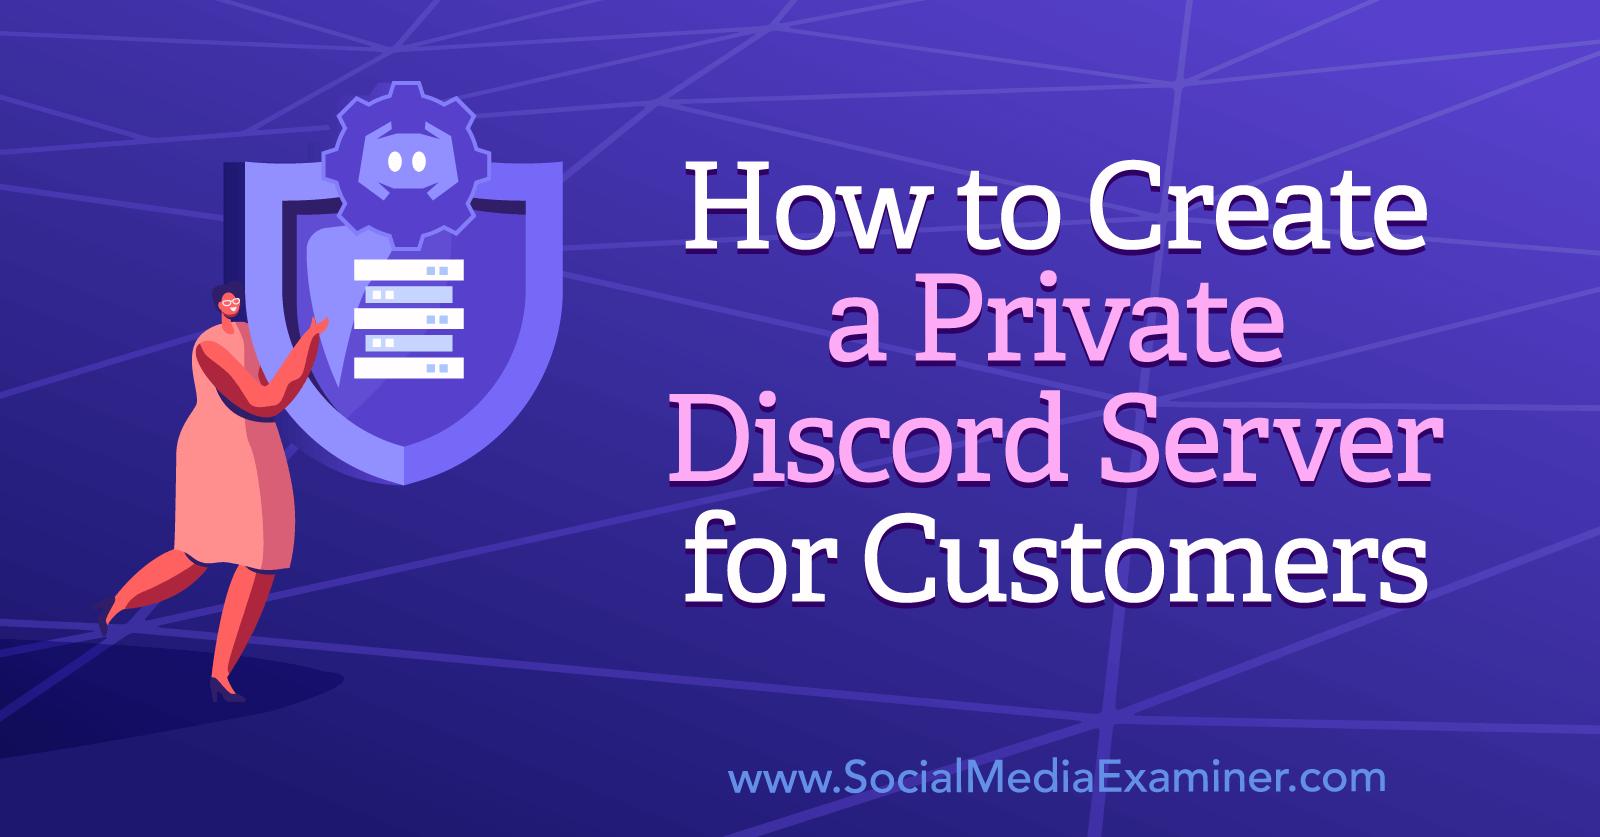 How to Create a Private Discord Server for Customers : Social Media Examiner